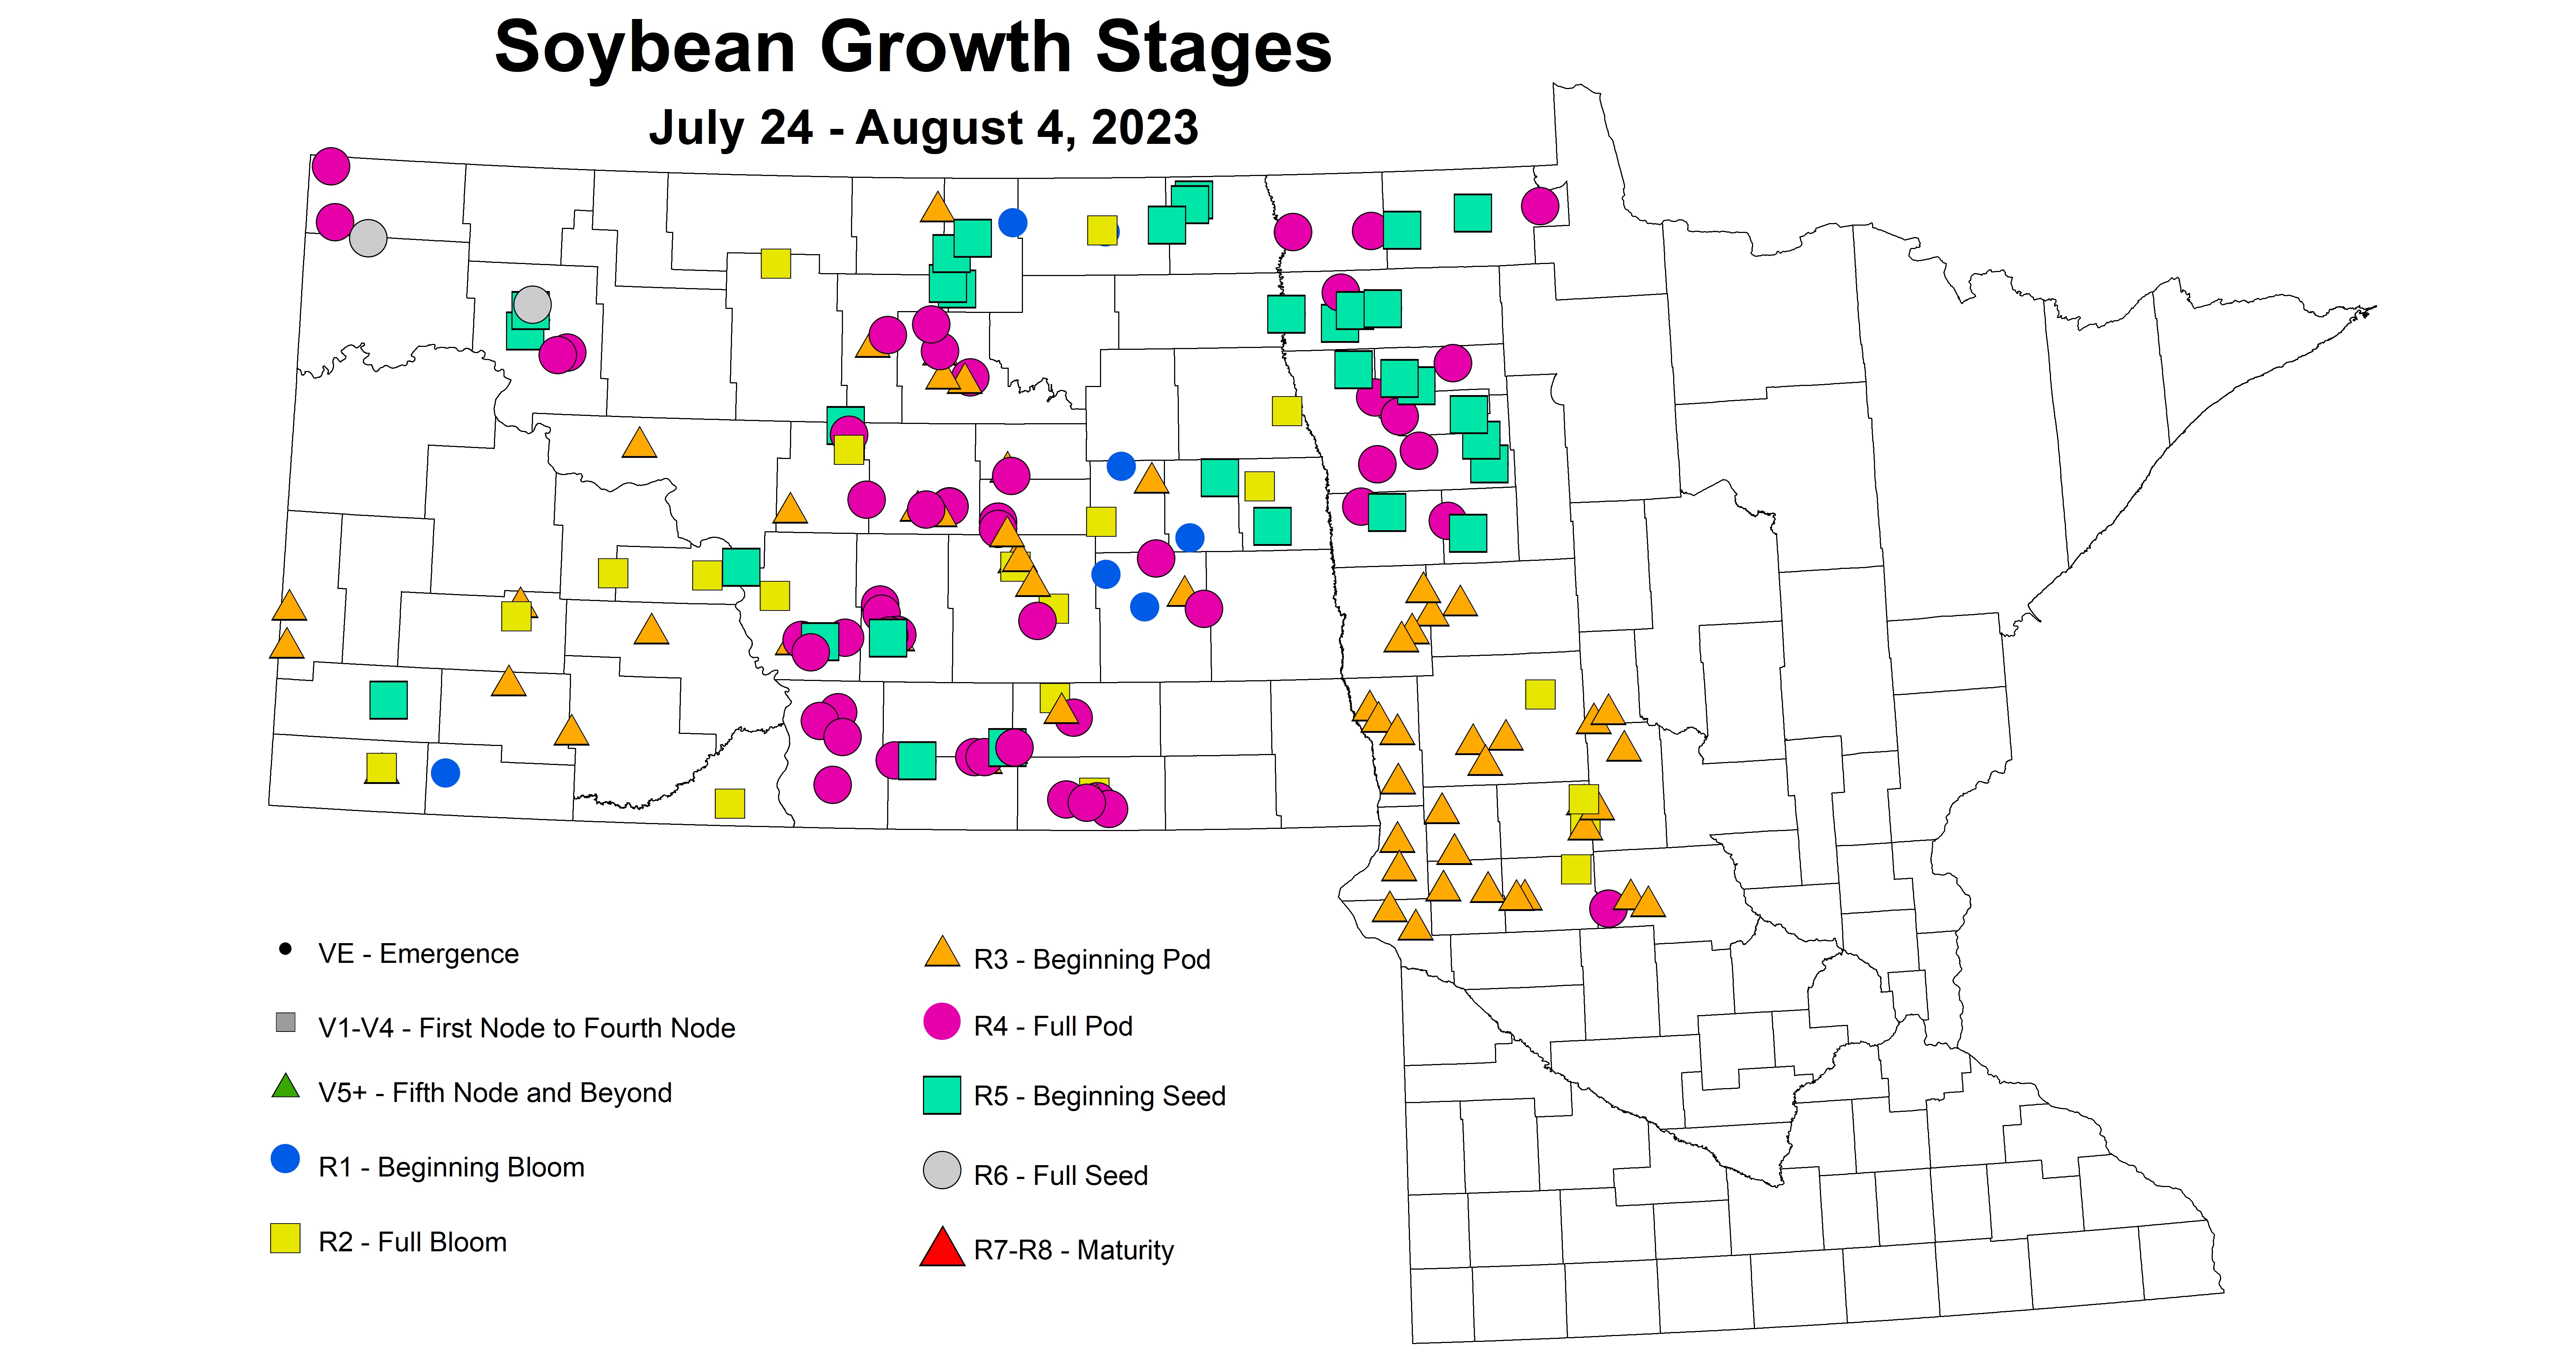 soybean growth stages 7.24-8.4 2023